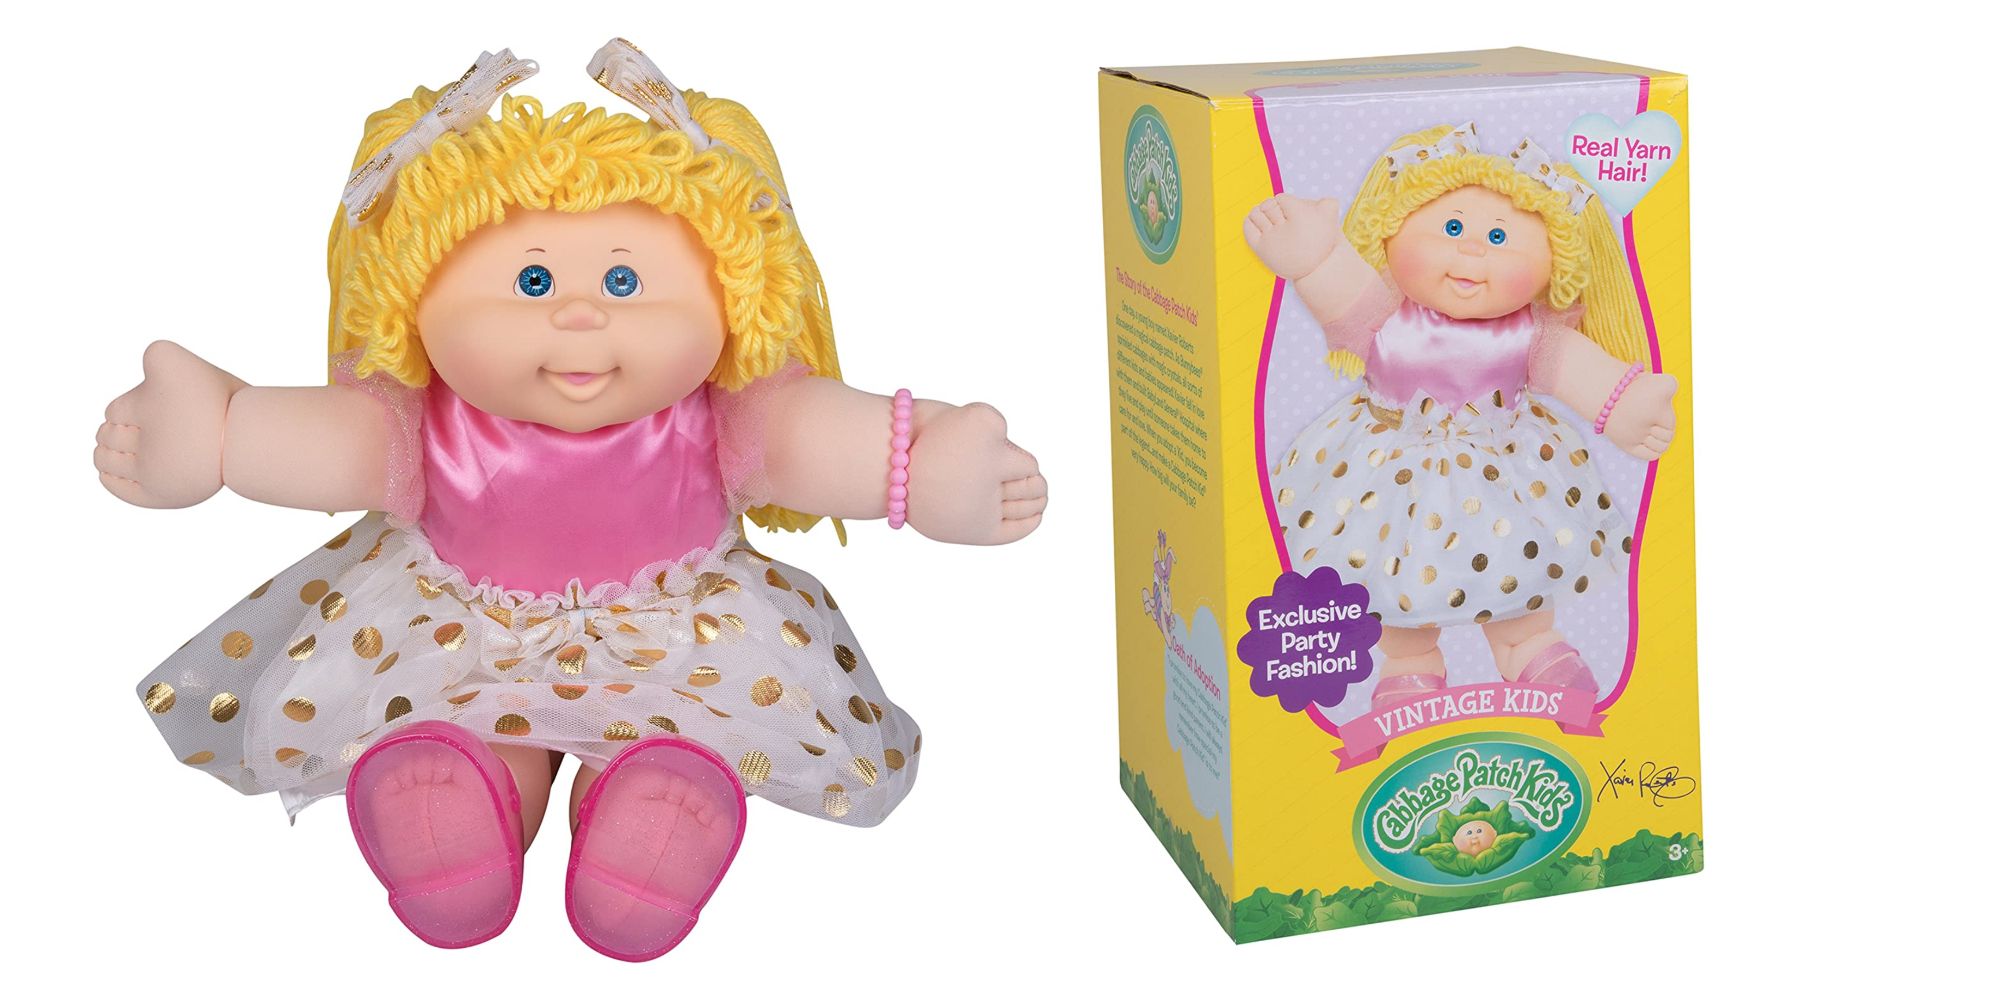 Vintage Cabbage Patch Doll from Amazon